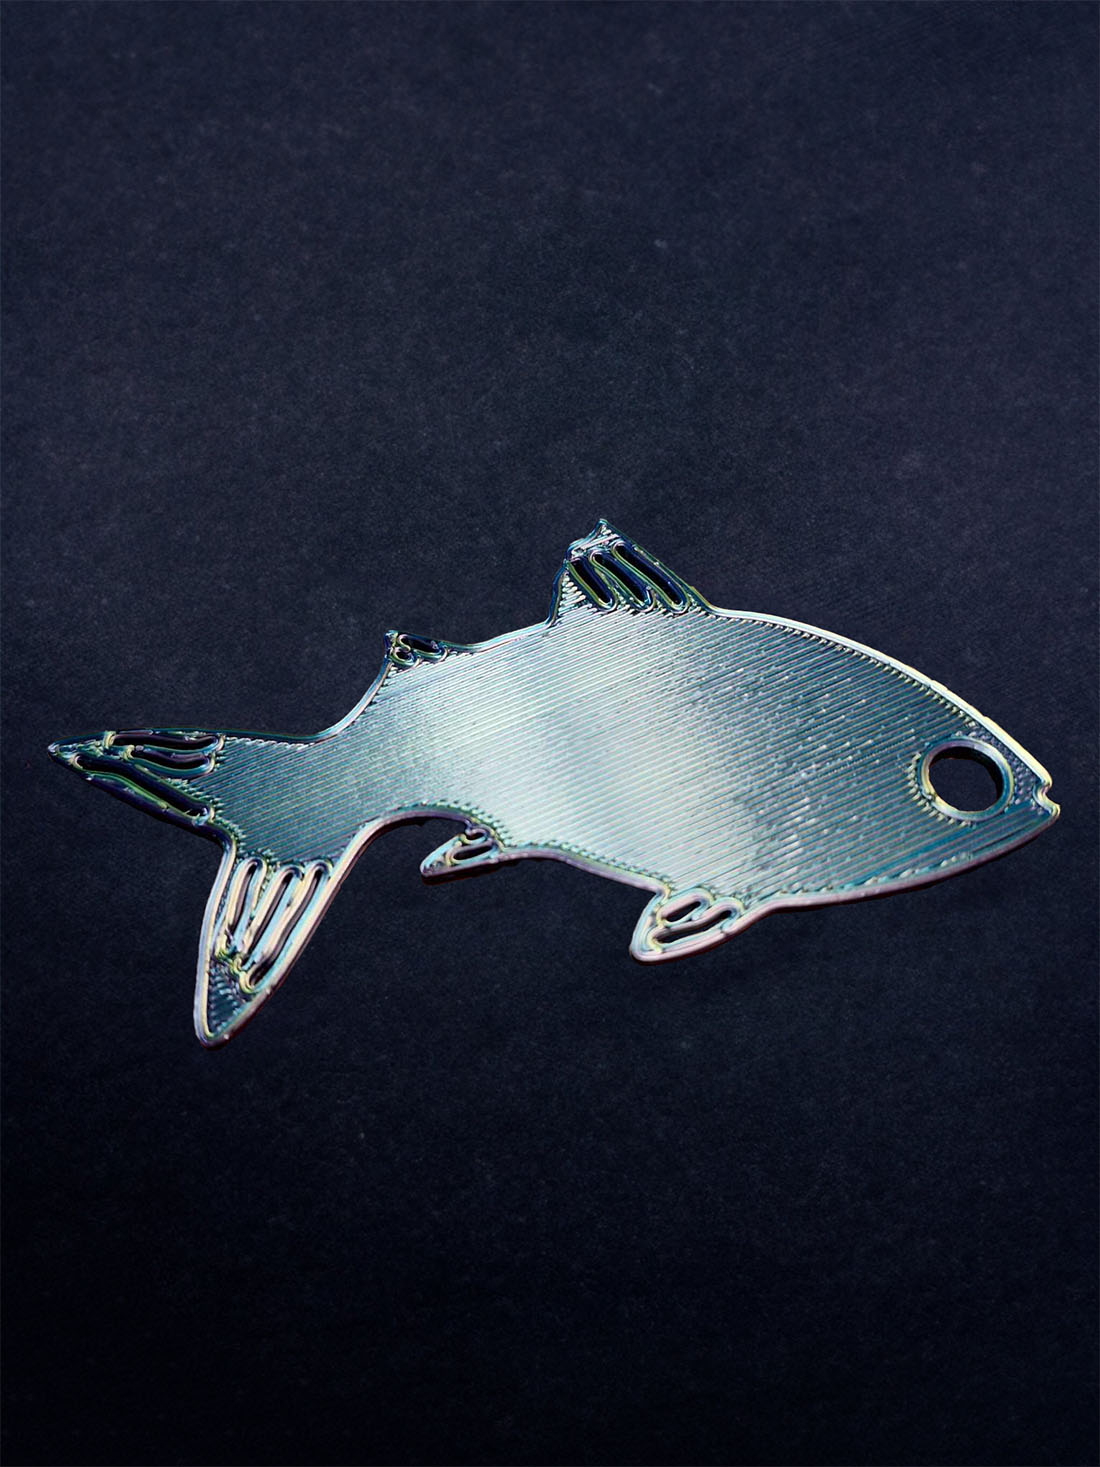 Silvery fish-shaped 'Fishy Bite' keychain with a shiny finish on a dark backdrop, ideal for nautical enthusiasts.